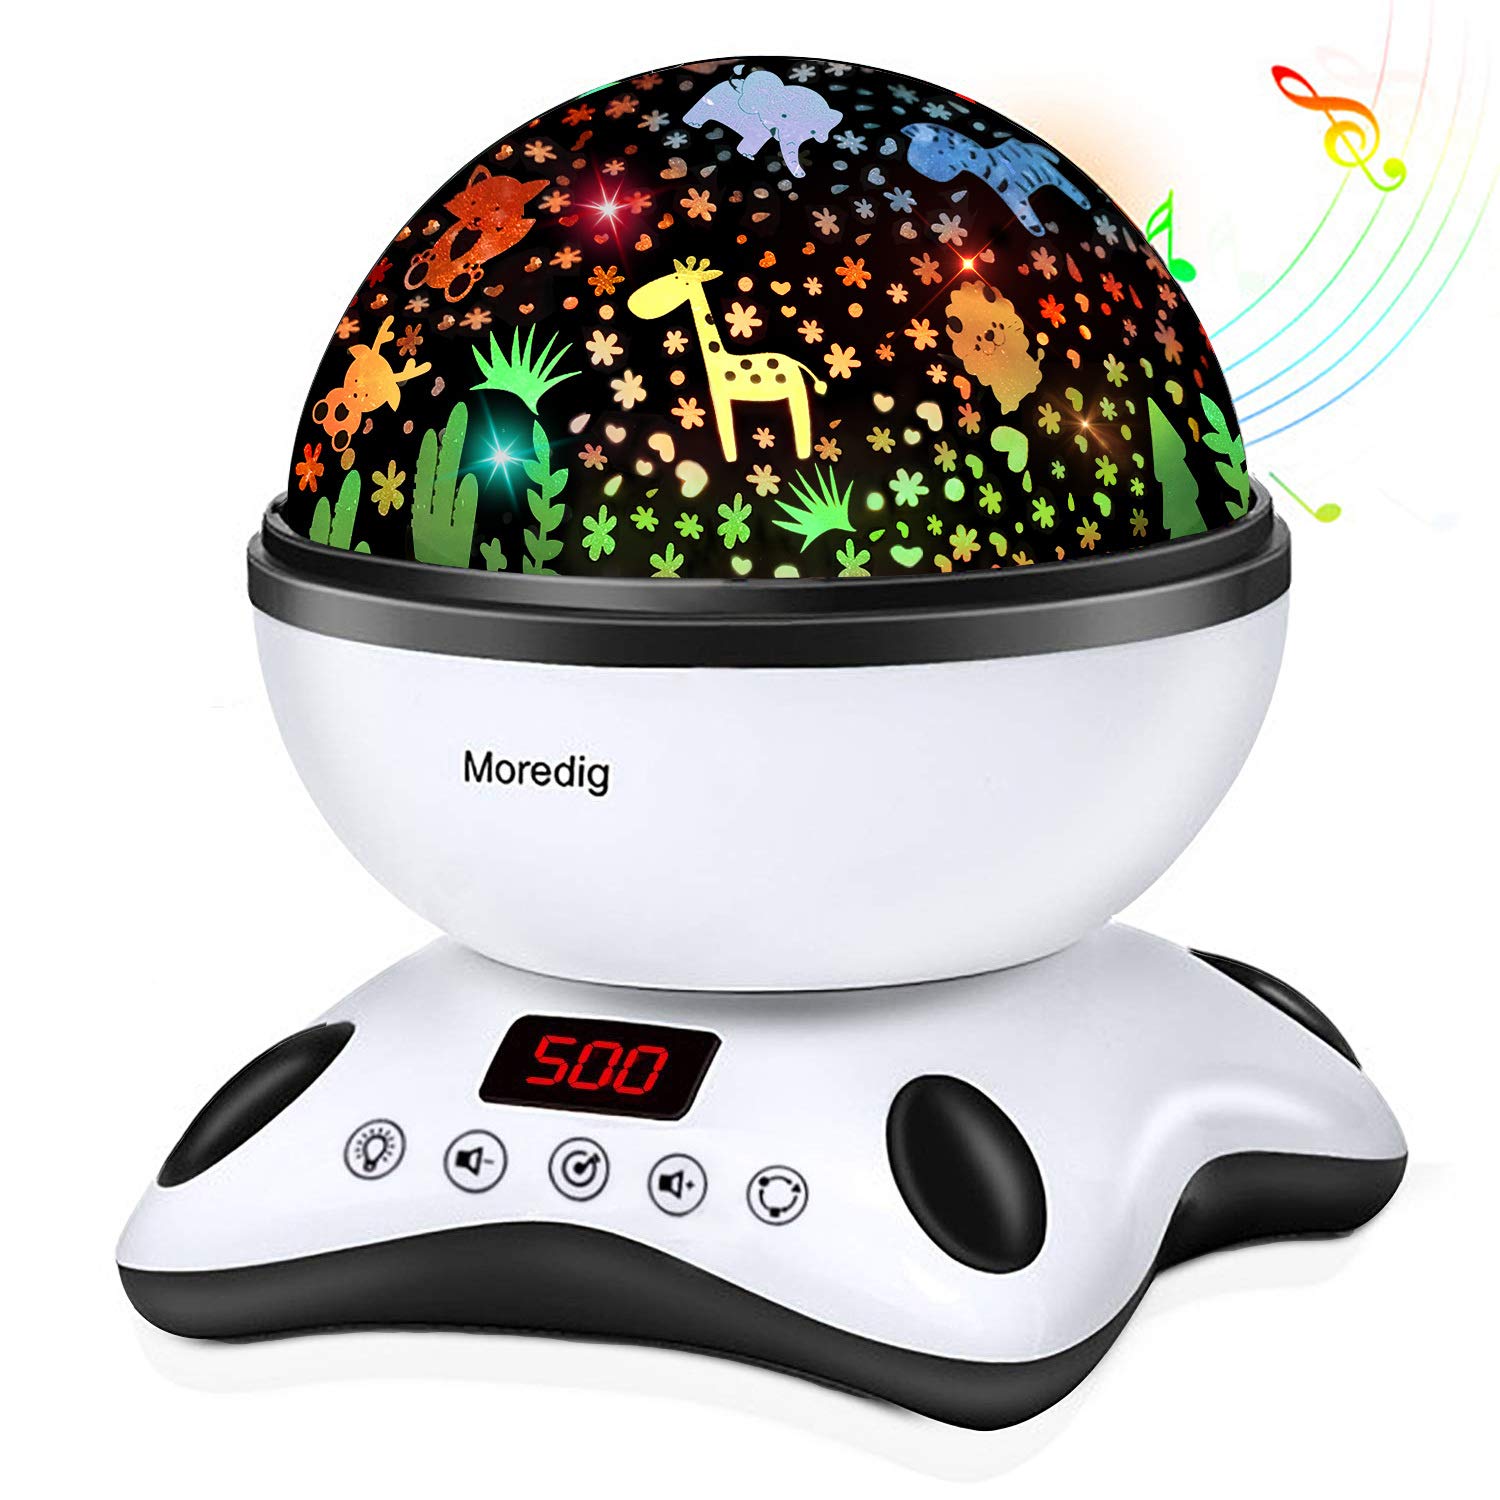 Moredig Night Light Projector, Night Light Kids with Remote and Timer, Built-in 12 Songs and 8 Colorful Light Modes for Baby Children's Bedroom - Black White